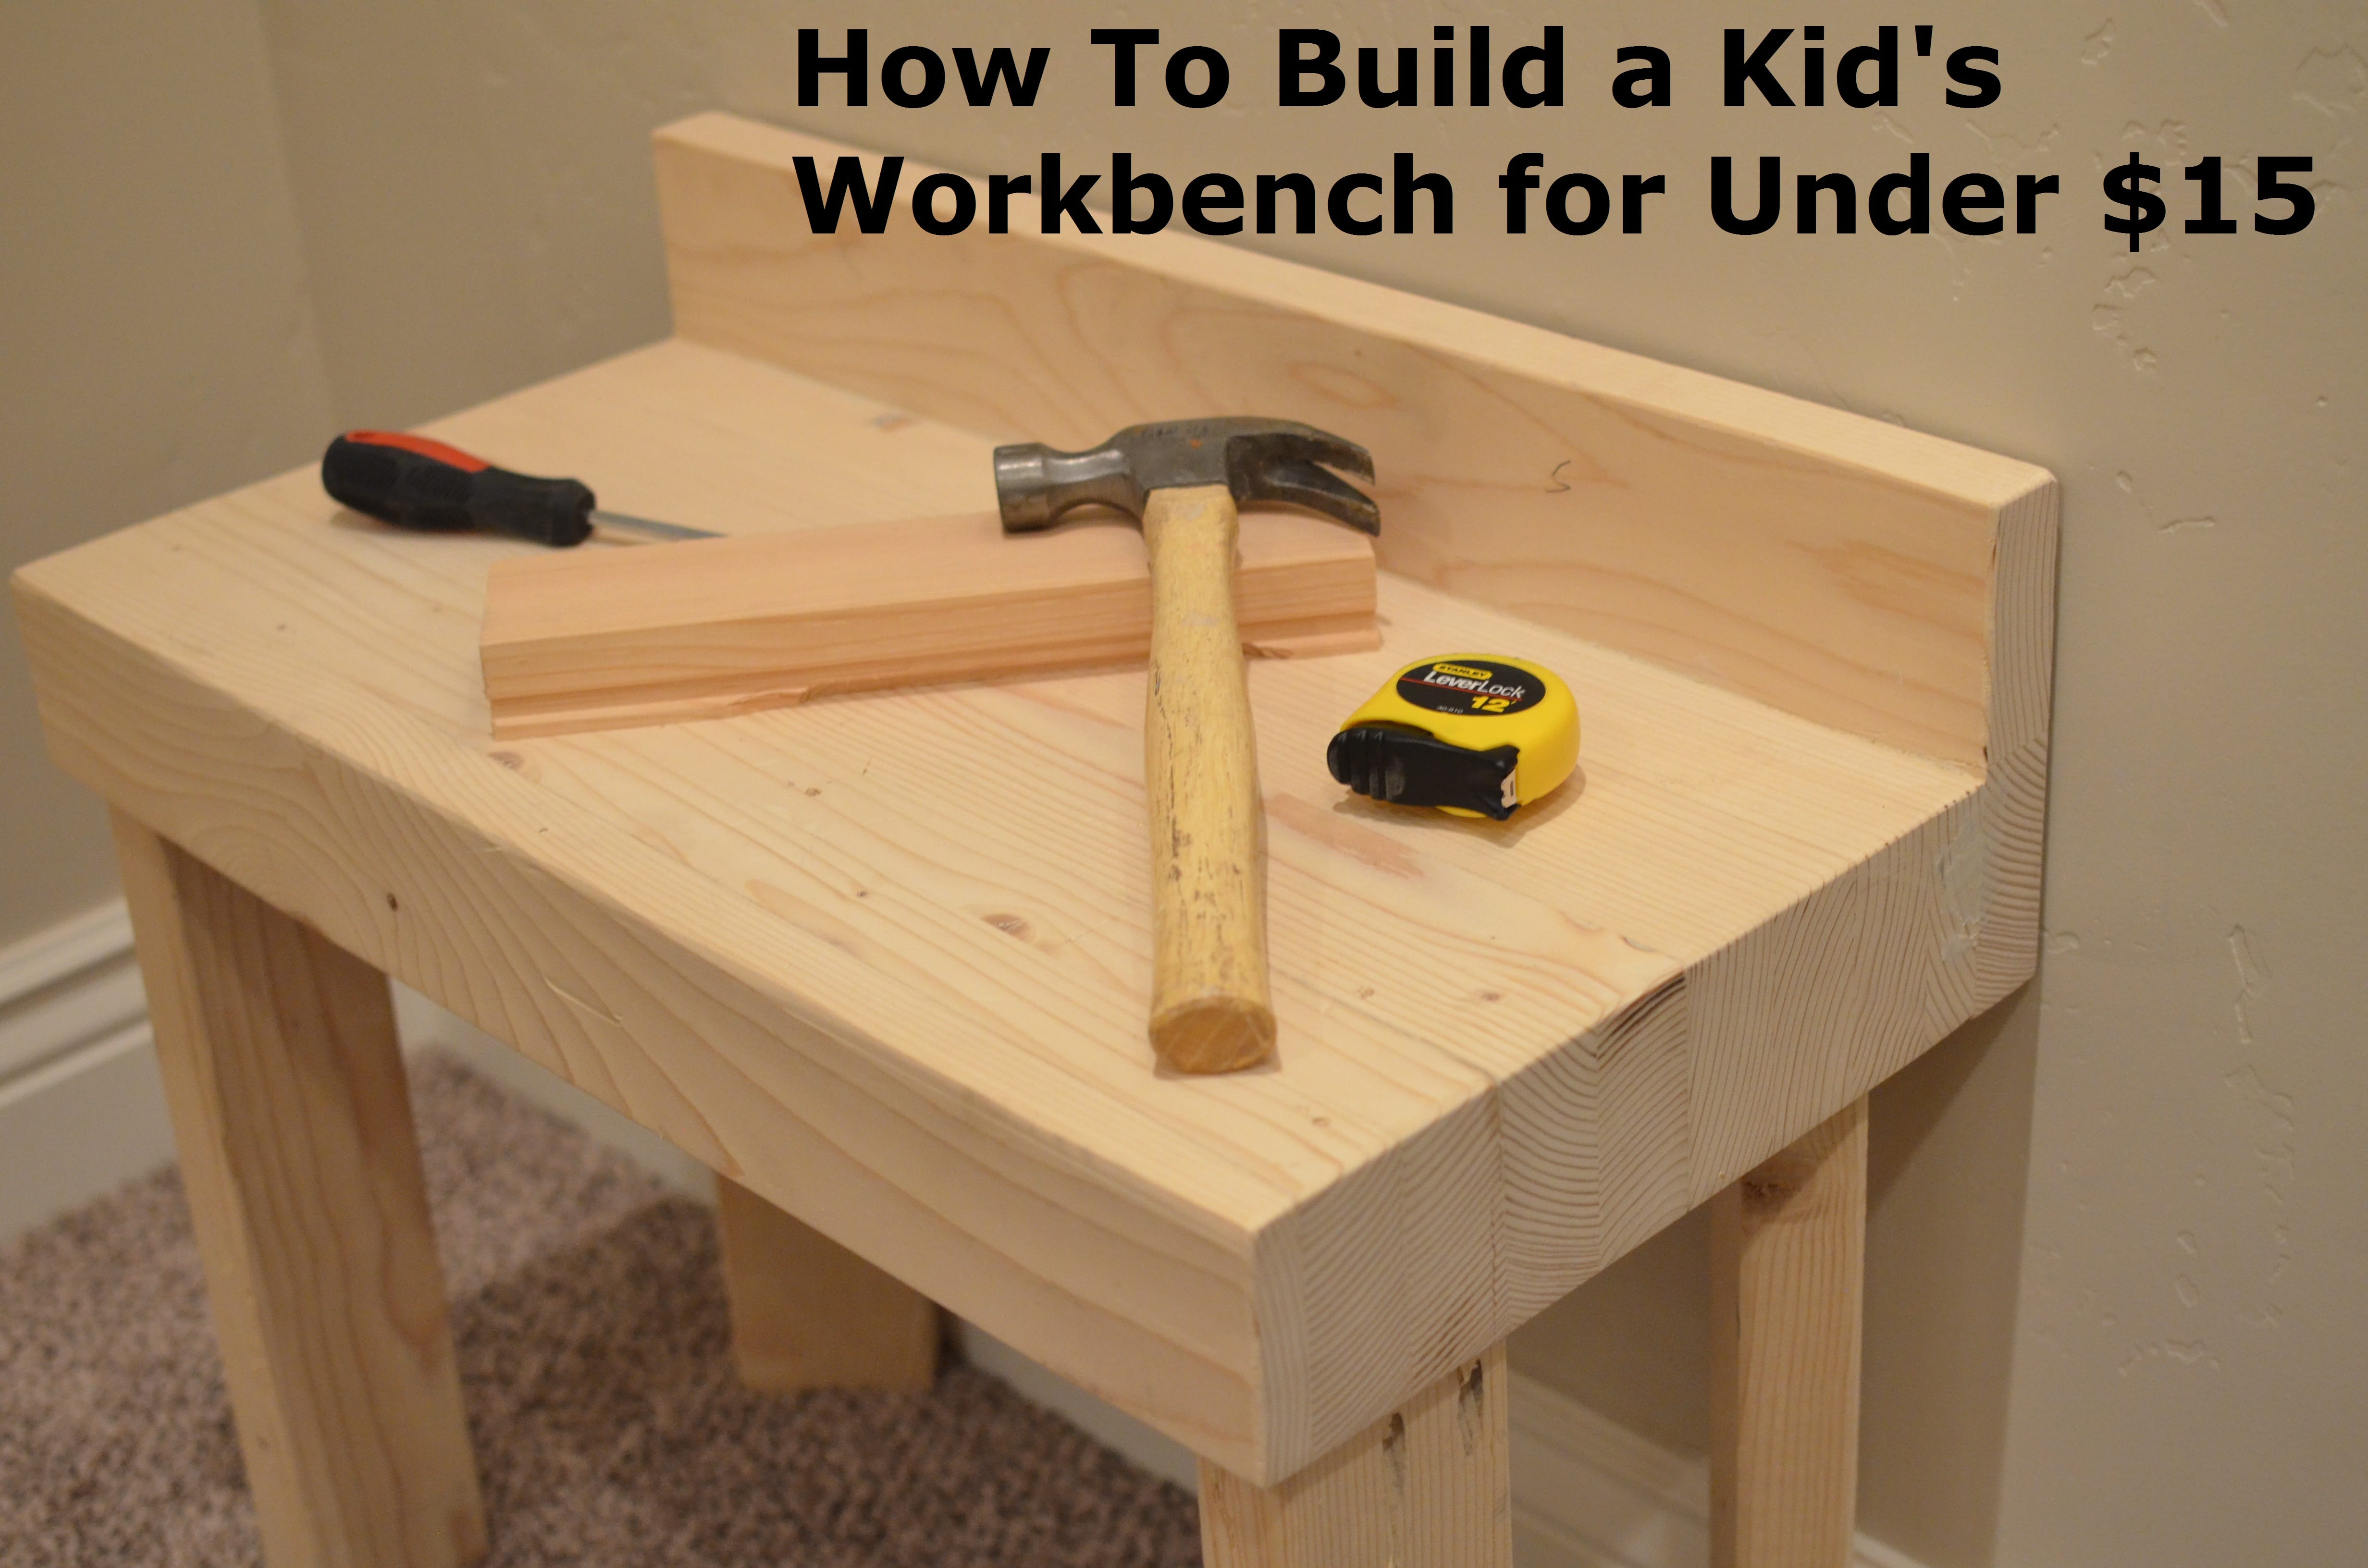 How to Build a Kid's Workbench for Under $15 - How To Build It